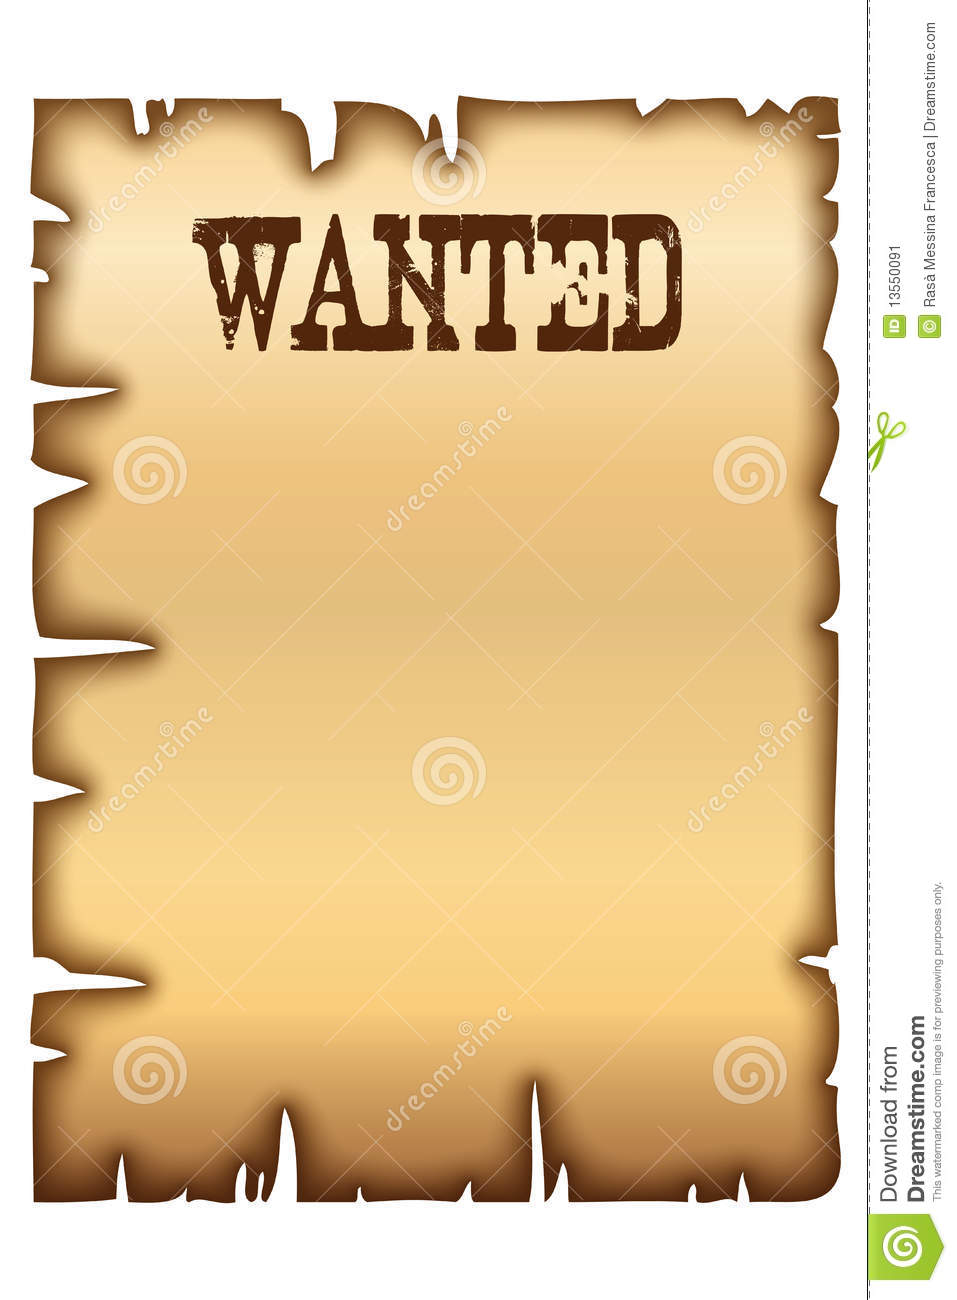 Wanted Poster Stock Image   Image  13550091